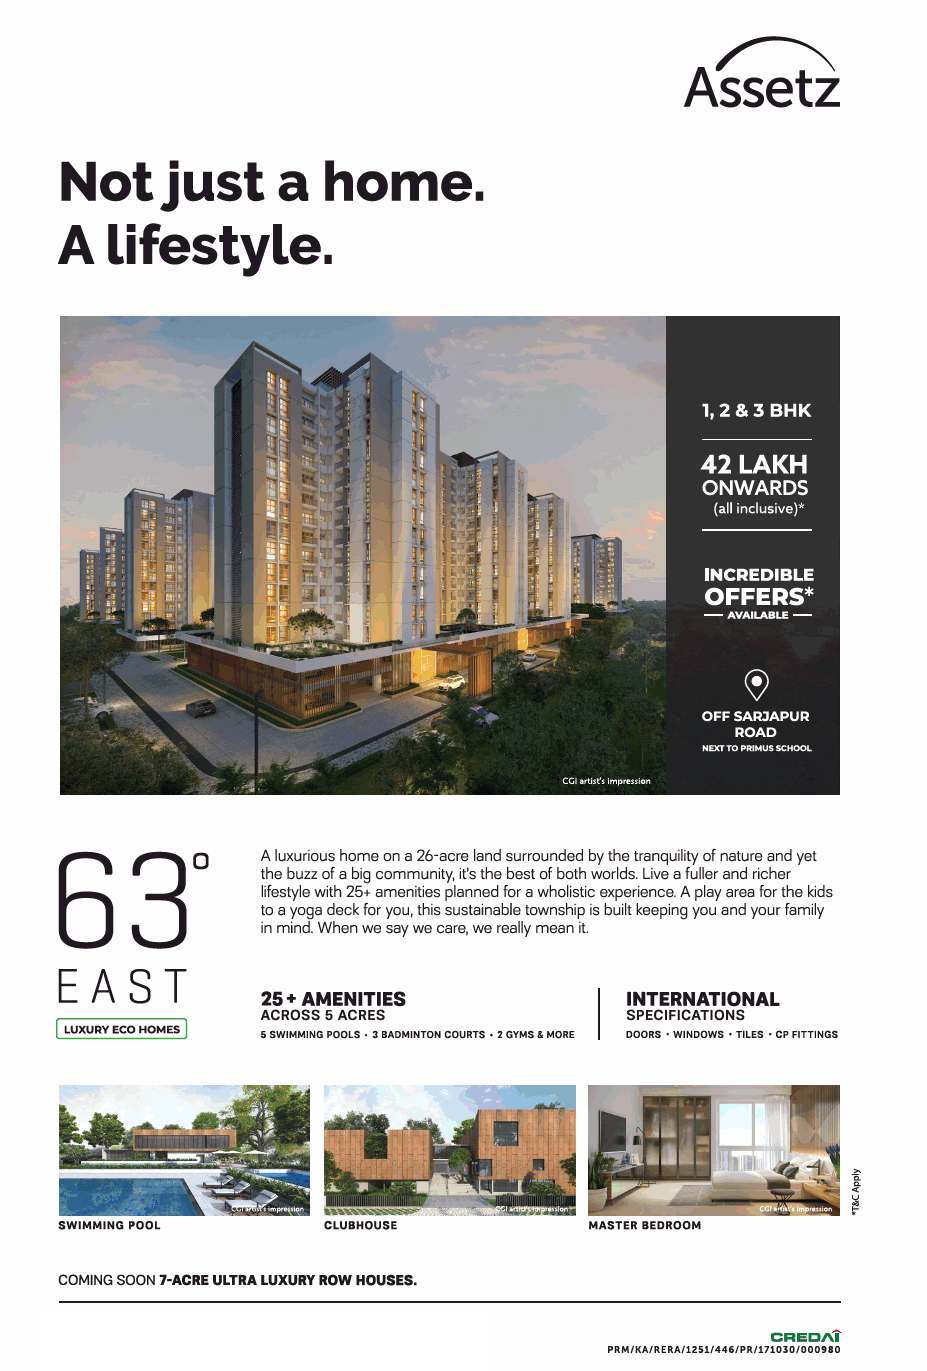 Live a fuller & richer lifestyle with 25+ amenities at Assetz 63° East in Bangalore Update